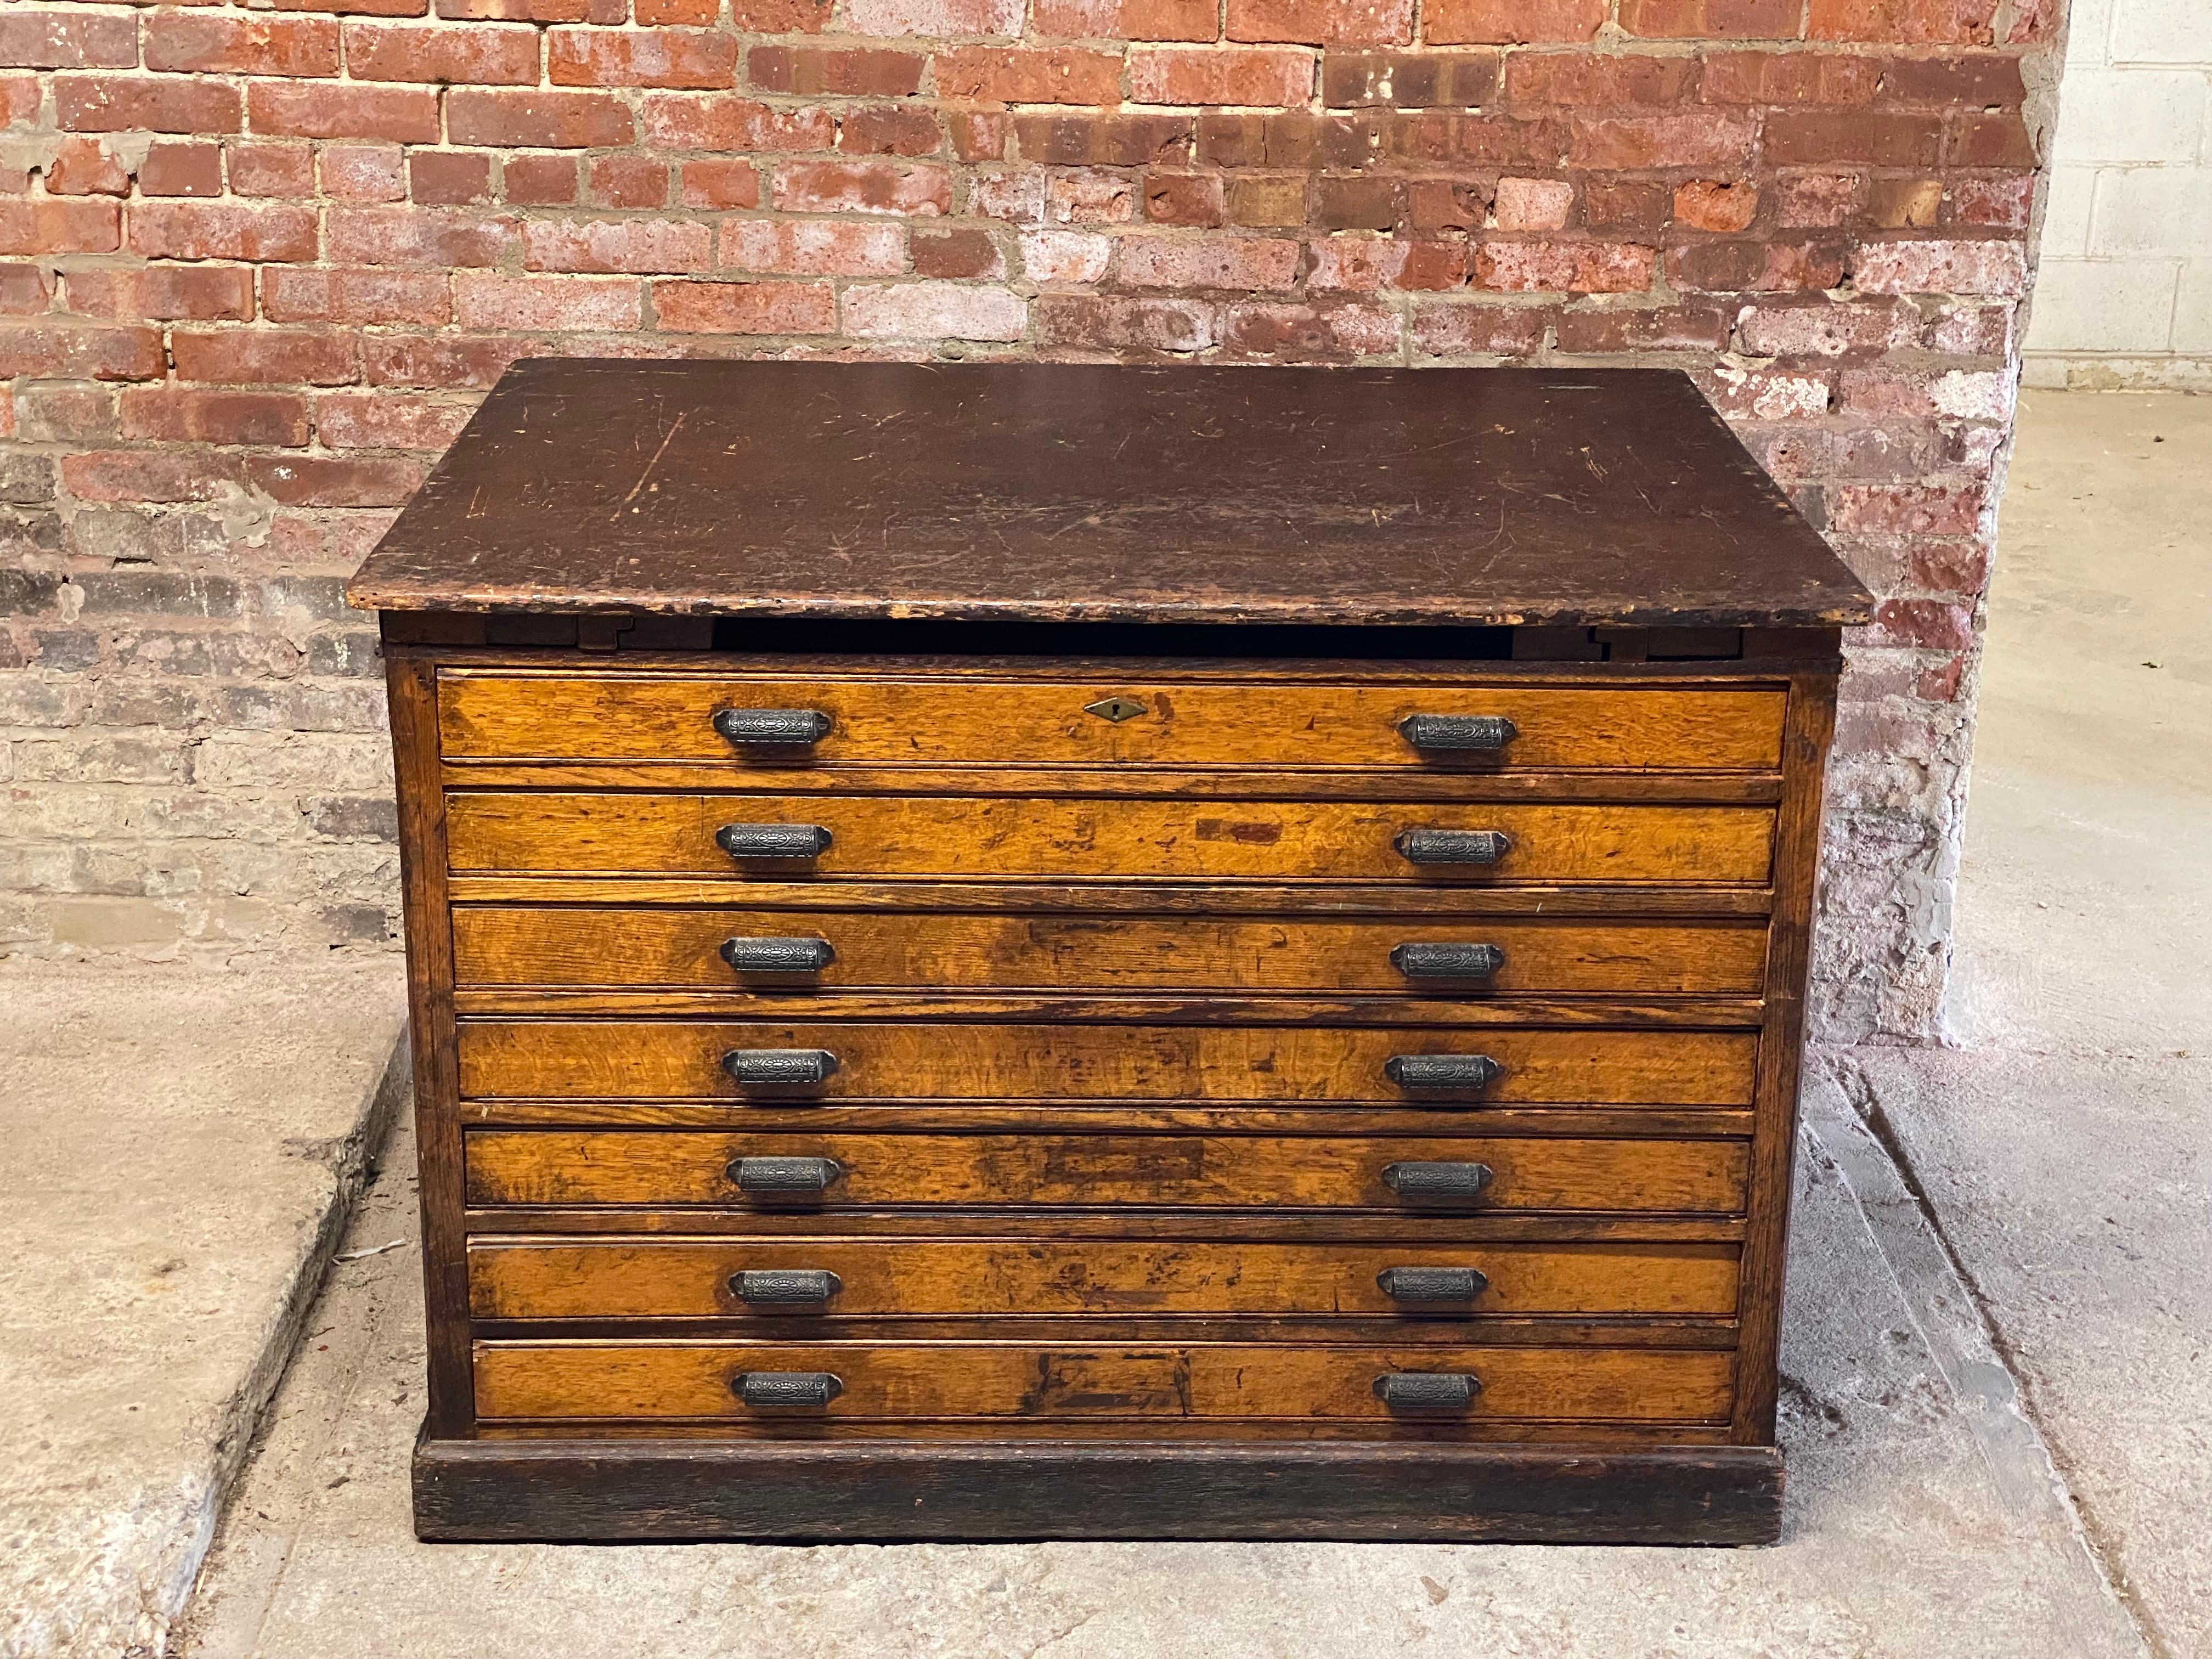 Massive Hamilton artist's/printer flat file. Circa 1890-1910. These are wonderful for unmounted or loose artwork, prints, photos, etc. Seven drawers. All original hardware. Good overall condition with wear to the finish, scratches, bumps, bruising,